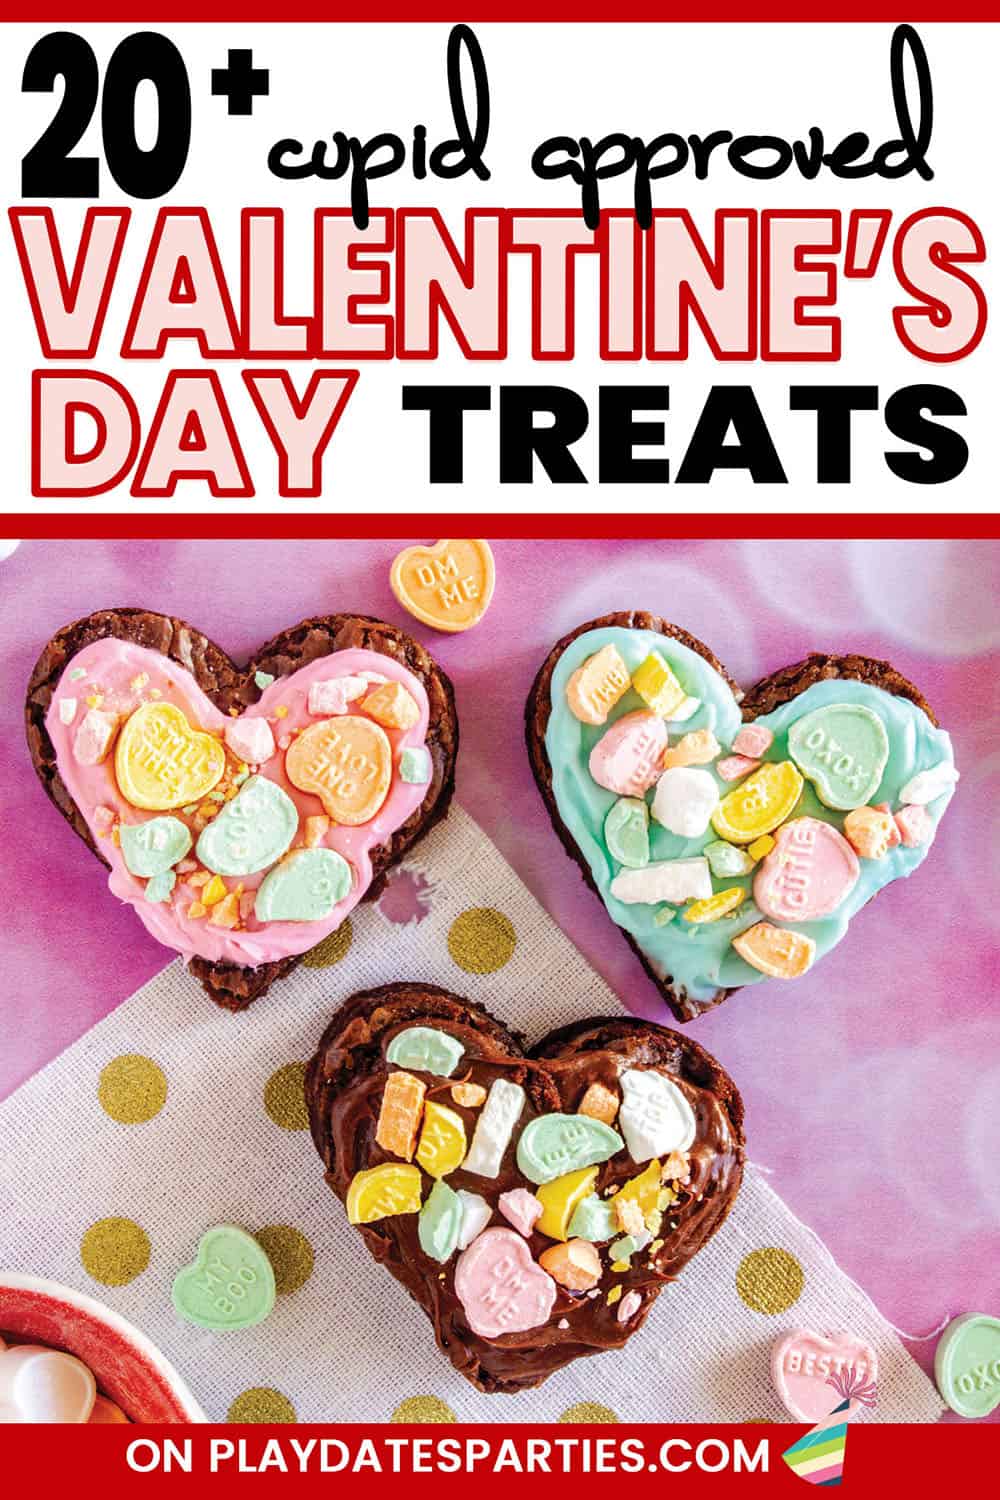 Photo of heart shaped brownies with text overlay 20+ cupid approved Valentine's Day treats.